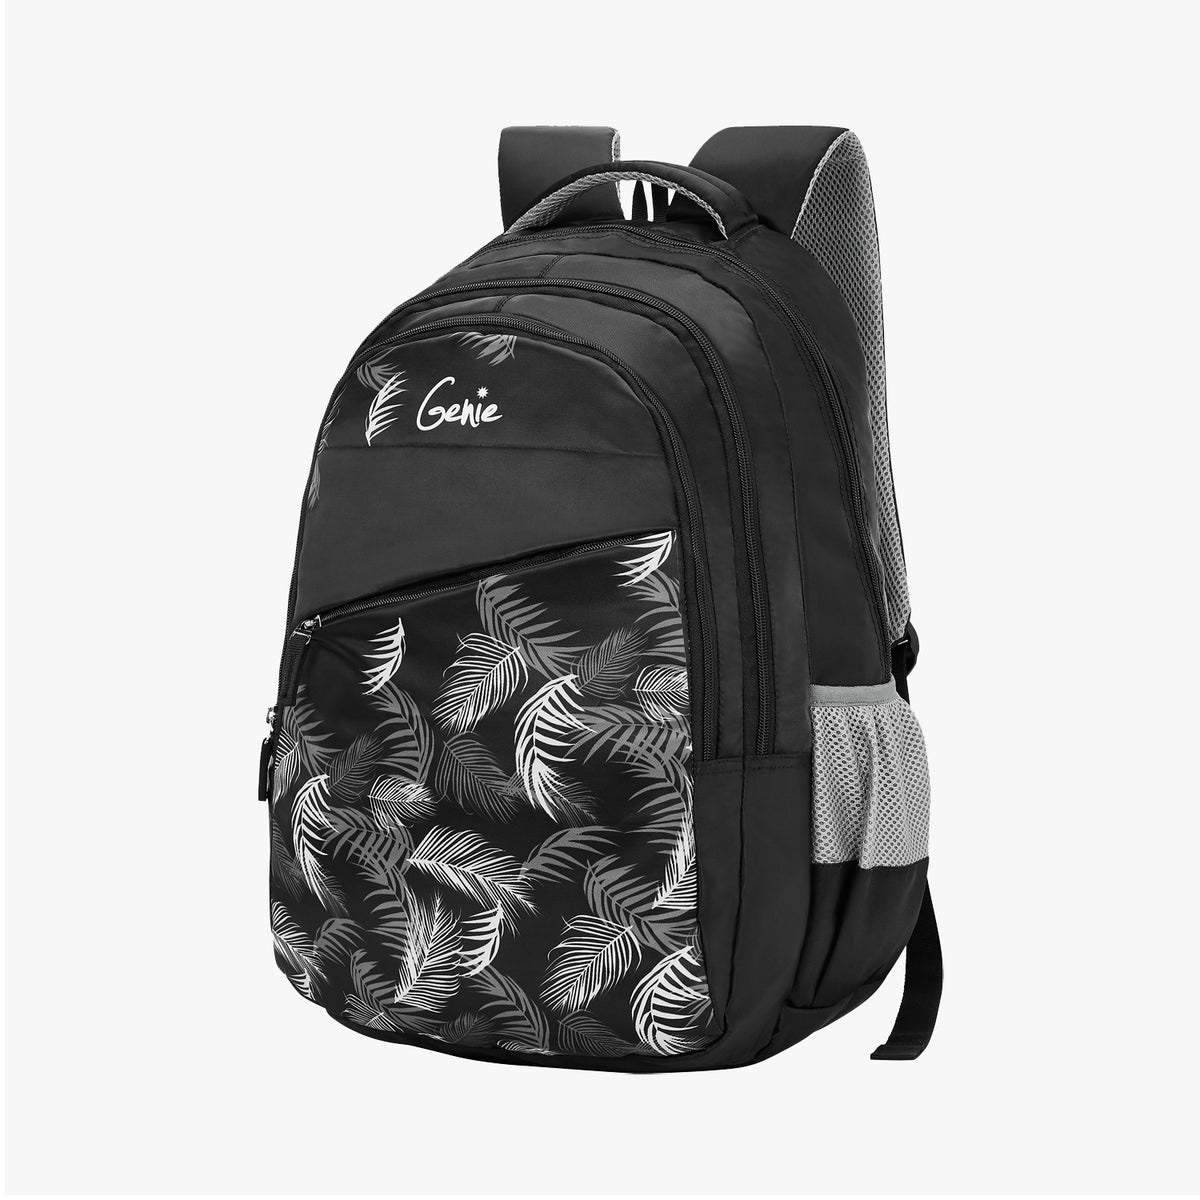 School Logo Print Bags, School Promotional Backpack, School Bag  Manufacturer, High Quality Bags at Rs 380/piece | Promotional School Bag in  Patna | ID: 2852859802888